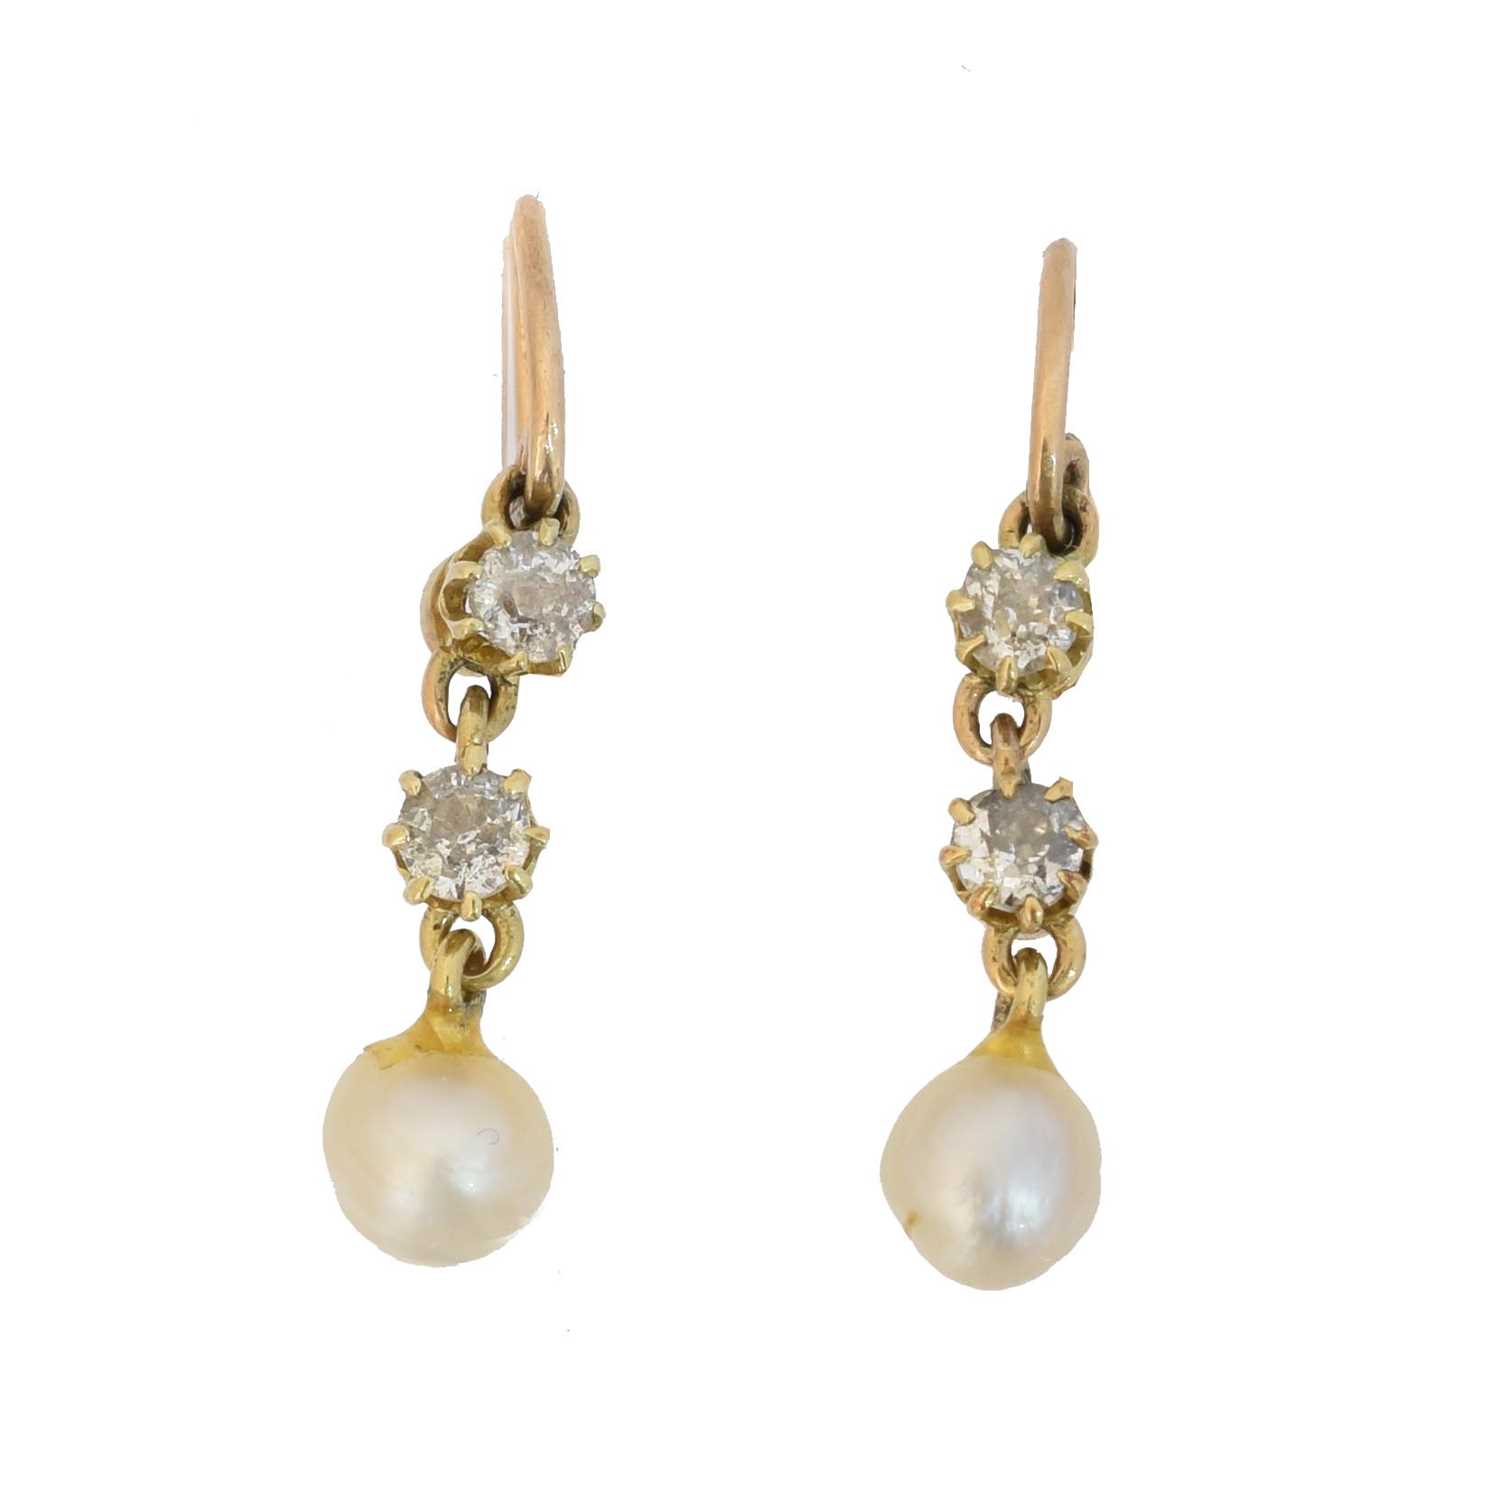 Lot 77 - A pair of diamond and pearl earrings